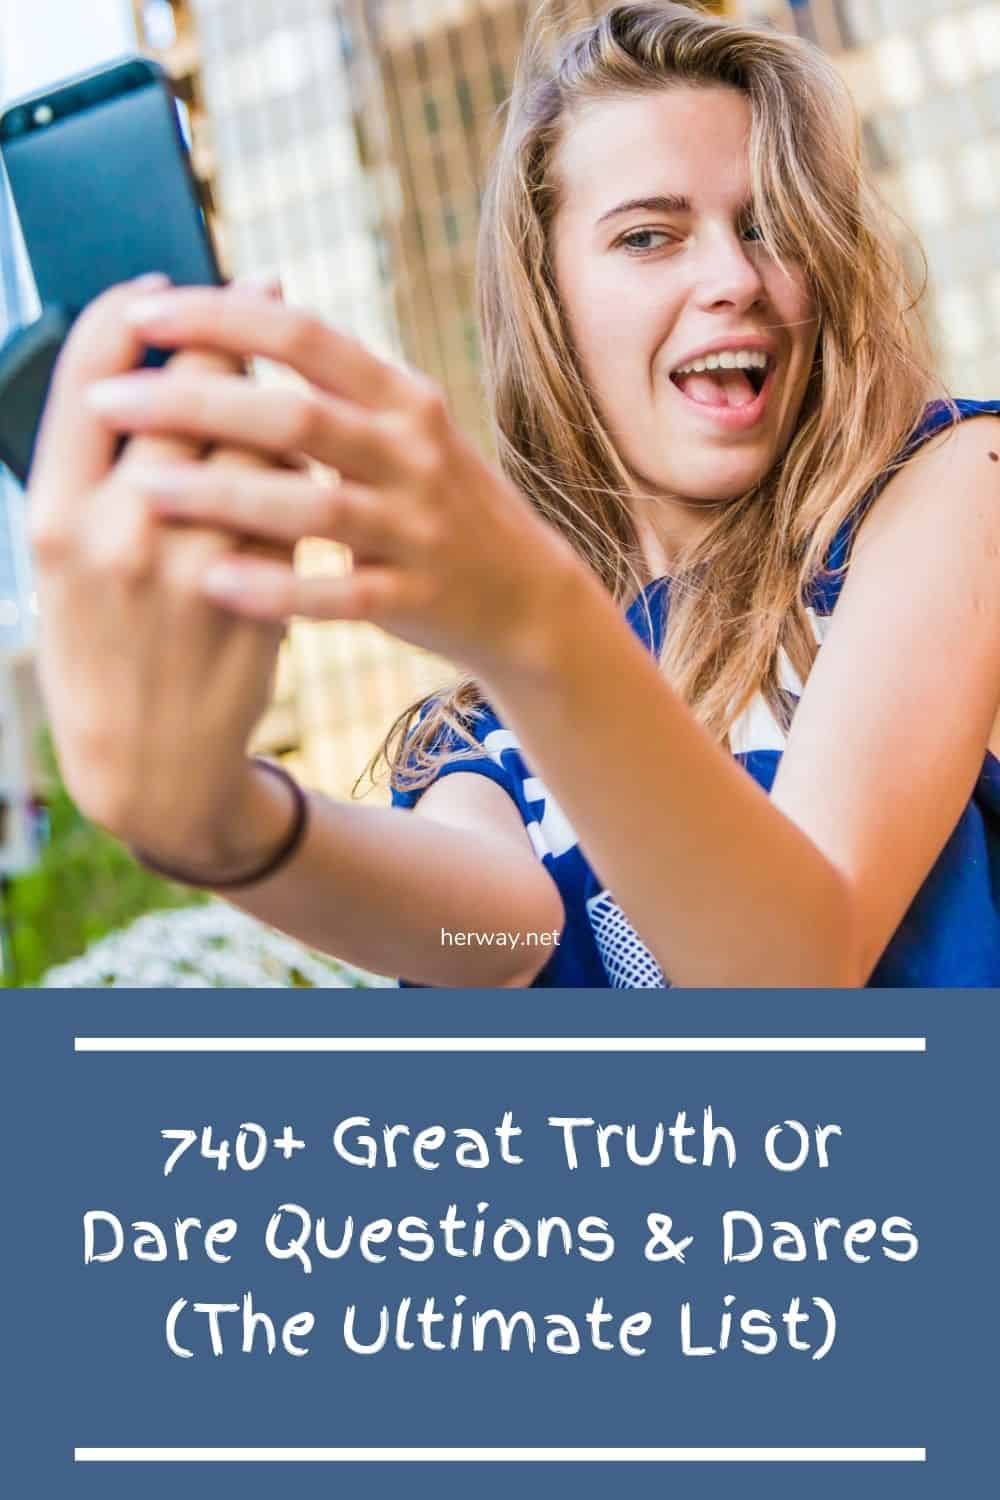 740+ Great Truth Or Dare Questions & Dares (The Ultimate List)